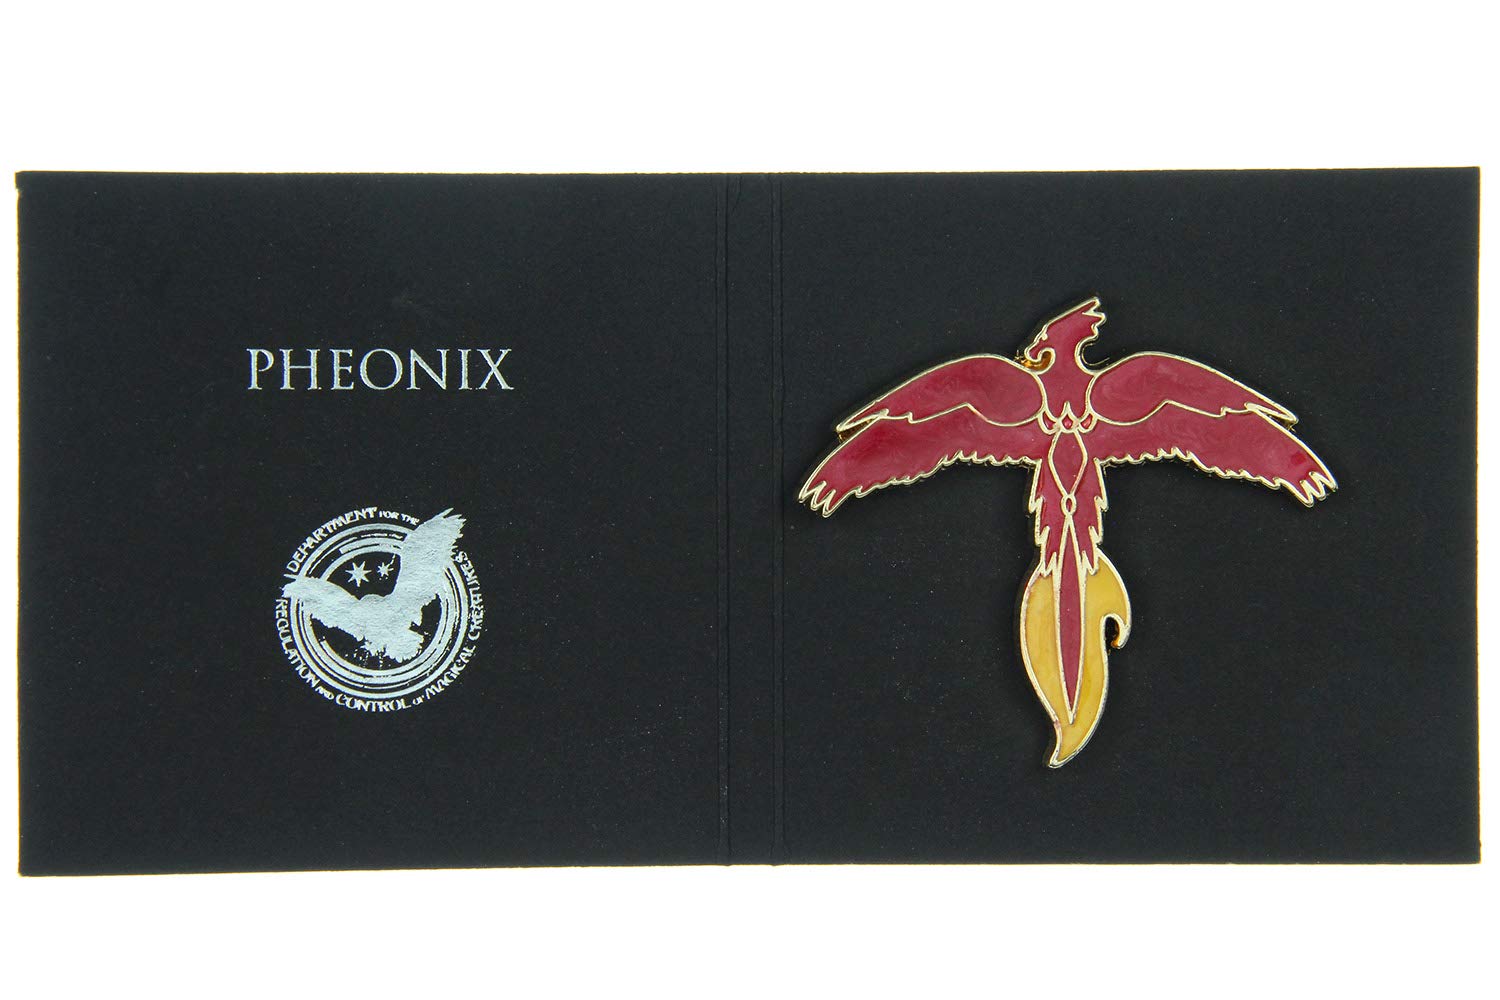 The box has spelled "phoenix" incorrectly.  Even so, this is an authentic Harry Potter pin licensed from Warner Bros.